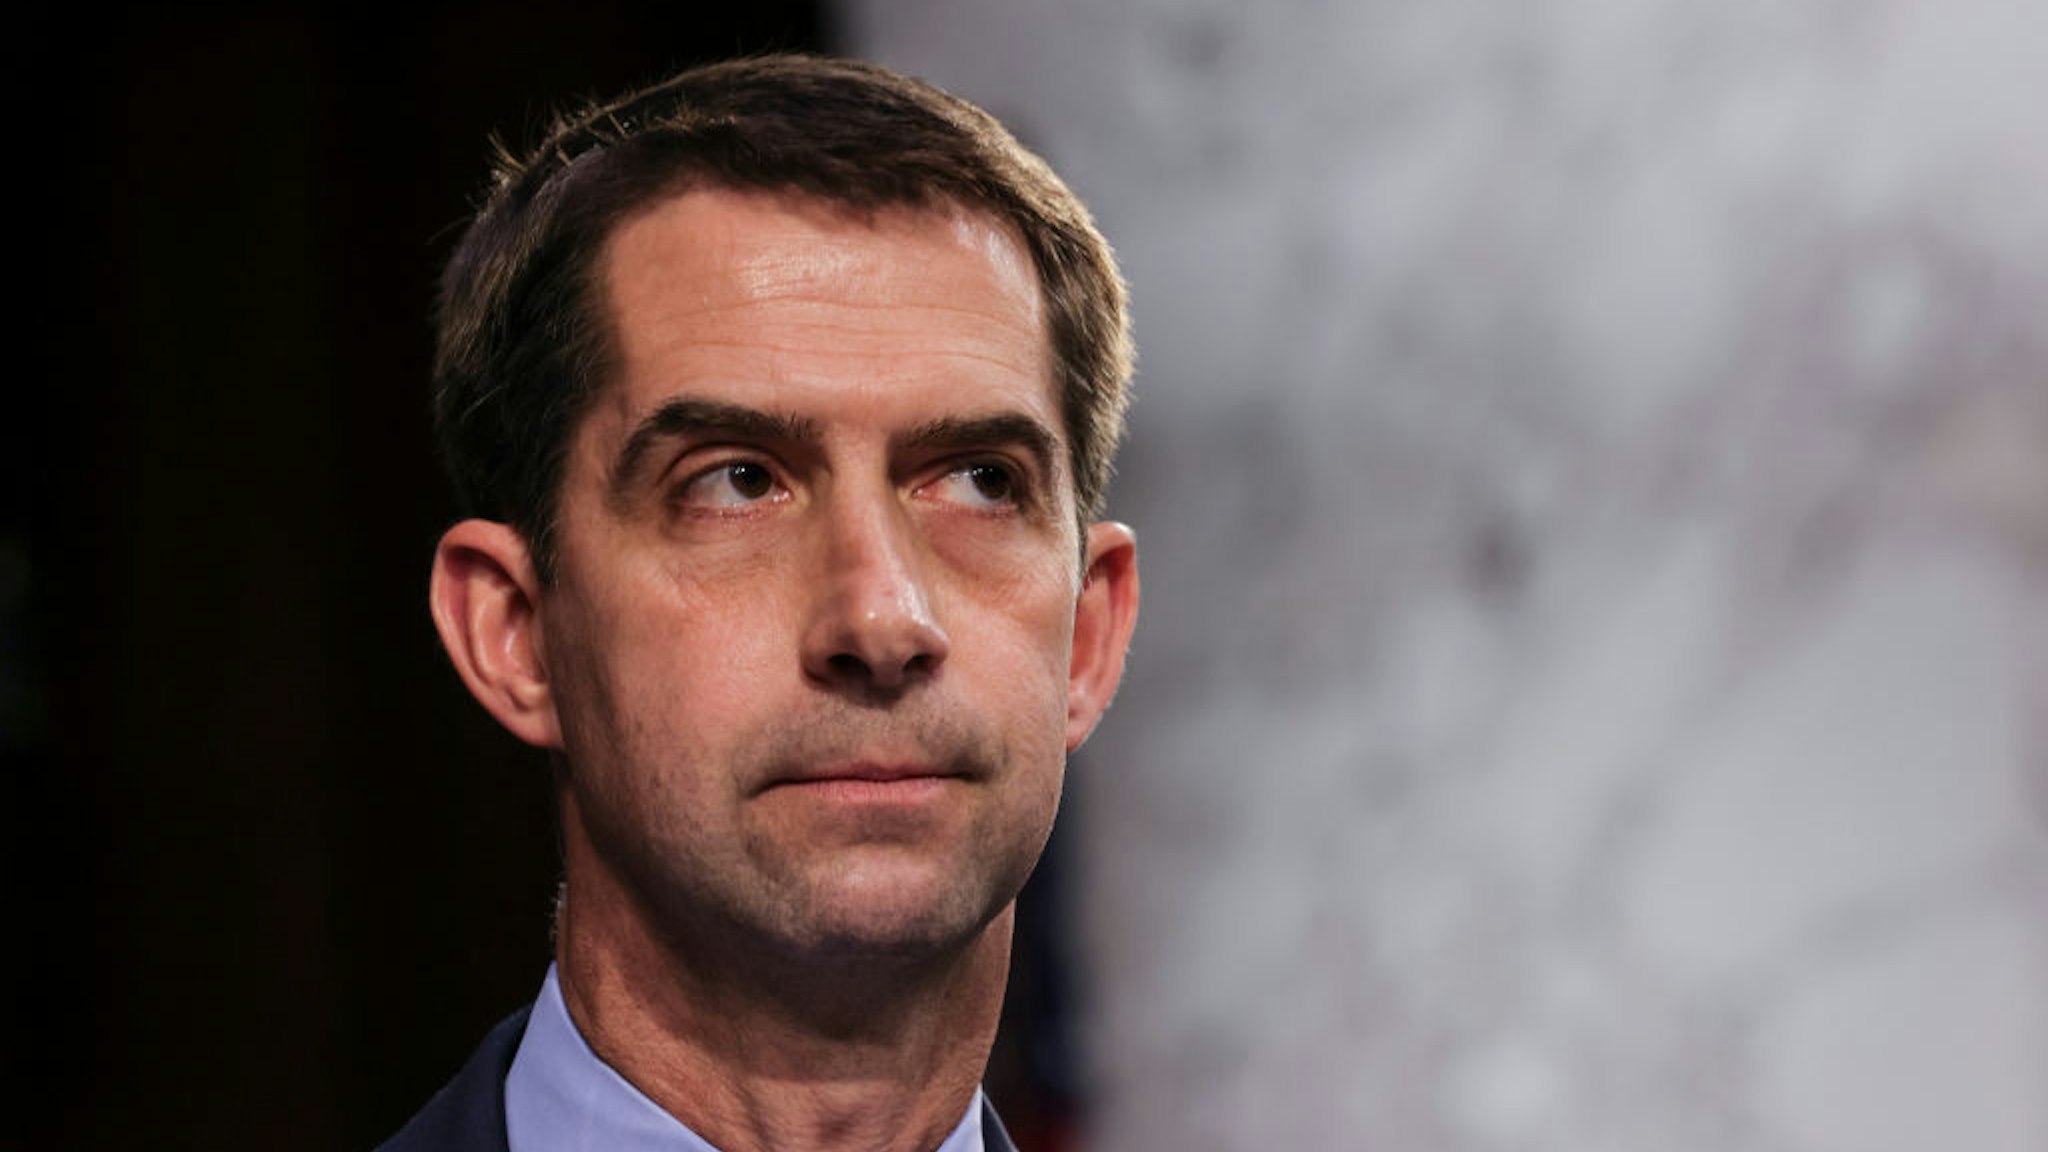 WASHINGTON, DC - APRIL 20: U.S. Sen. Tom Cotton (R-AR) attends a Senate Judiciary Committee hearing on voting rights on Capitol Hill on April 20, 2021 in Washington, DC. Among the other witnesses who will testify are U.S. Rep. Burgess Owens (R-UT); Stacey Abrams, Founder of Fair Fight Action; and Sherrilyn Ifill, President and Director-Counsel of the NAACP Legal Defense Fund. (Photo by Evelyn Hockstein-Pool/Getty Images)